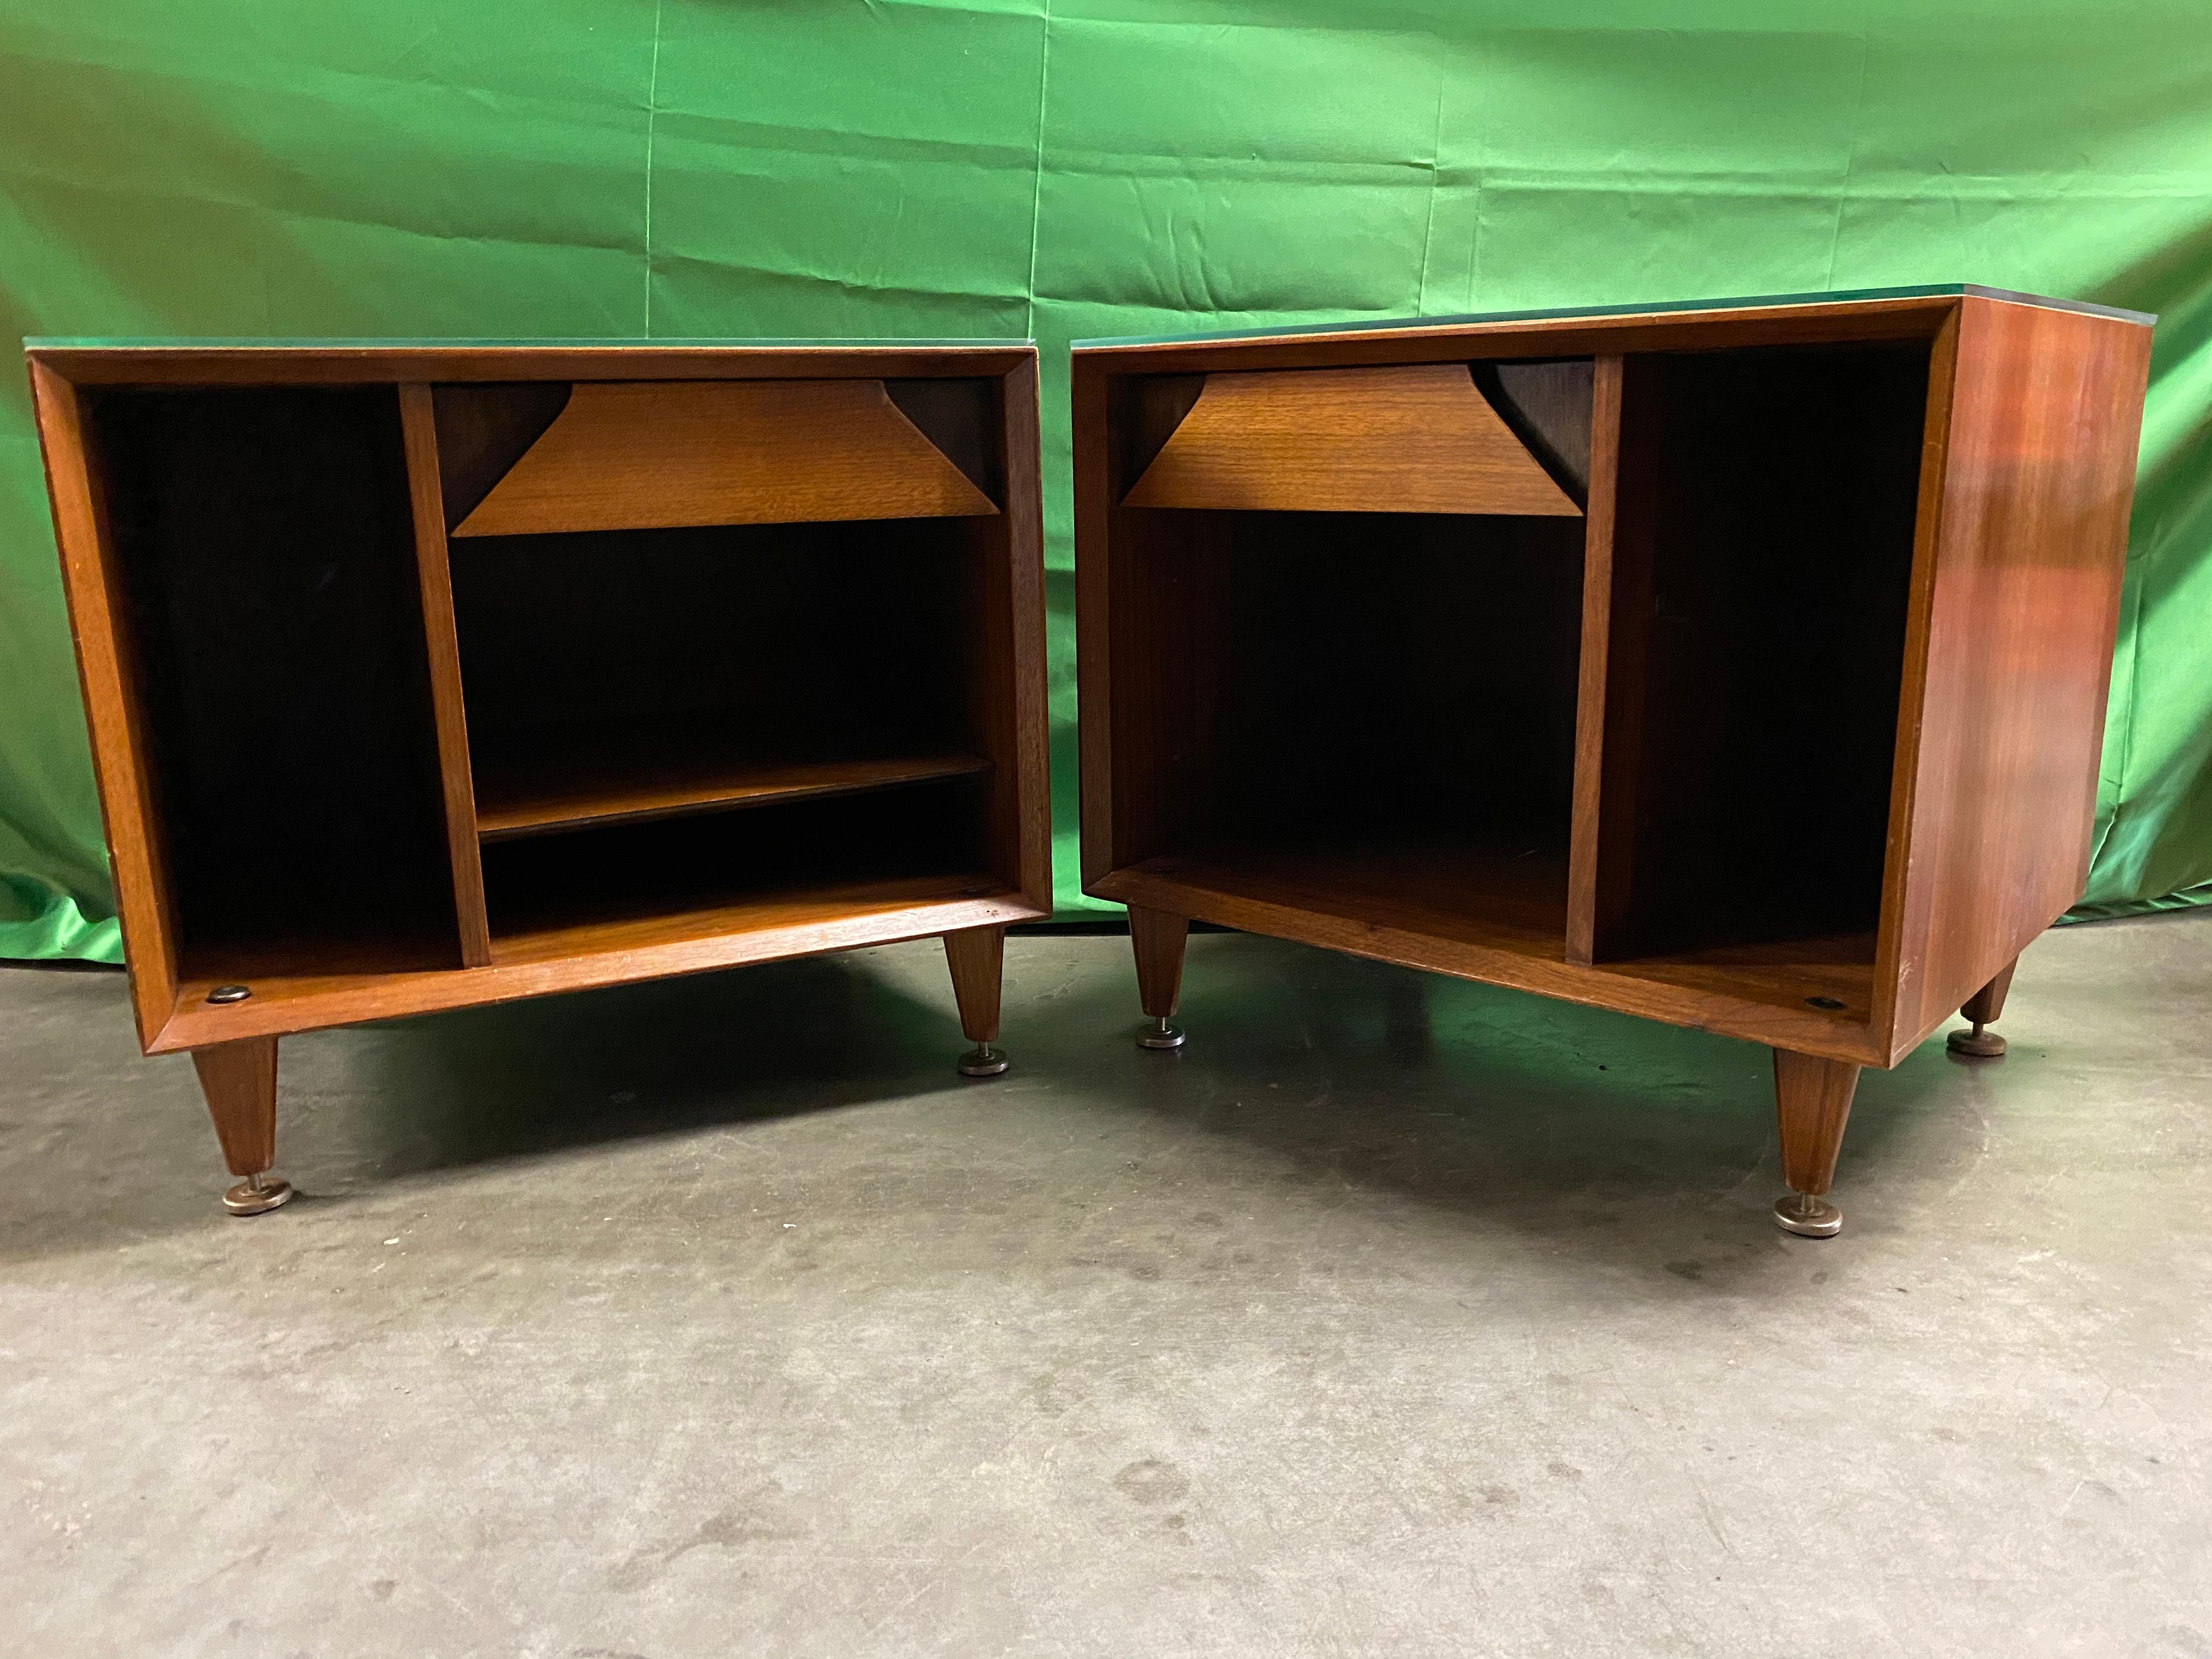 Pair of Mid-Century Modern Walnut Nightstands by Marc Berge for Grosfeld House For Sale 2